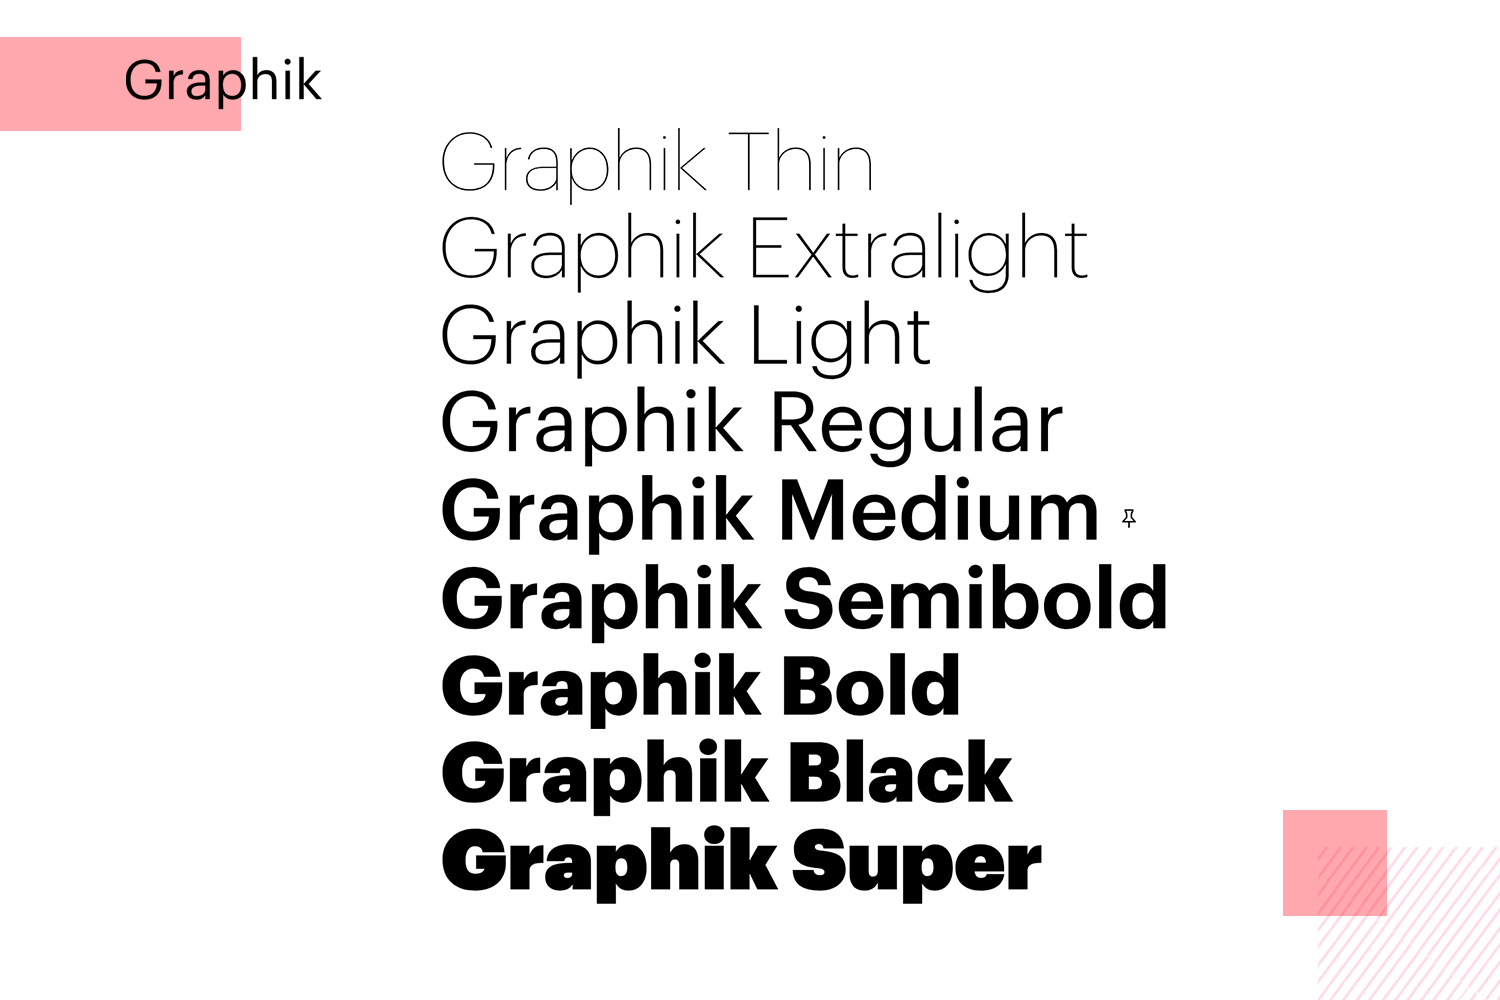 Graphik font variations in regular and bold styles